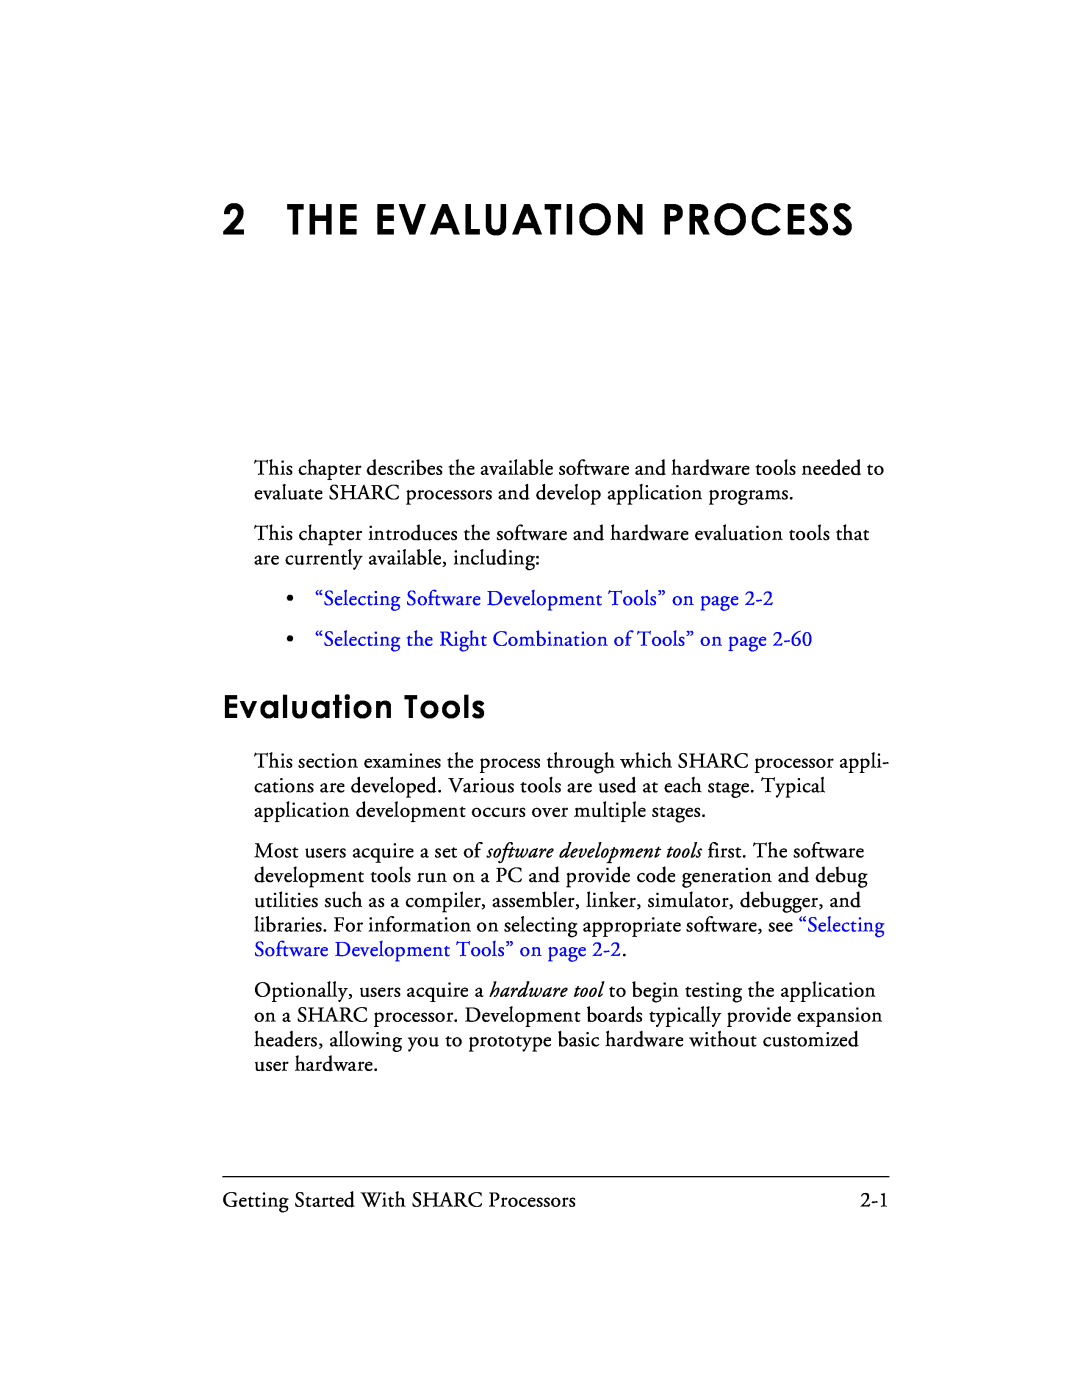 Analog Devices 82-003536-01 manual The Evaluation Process, Evaluation Tools 